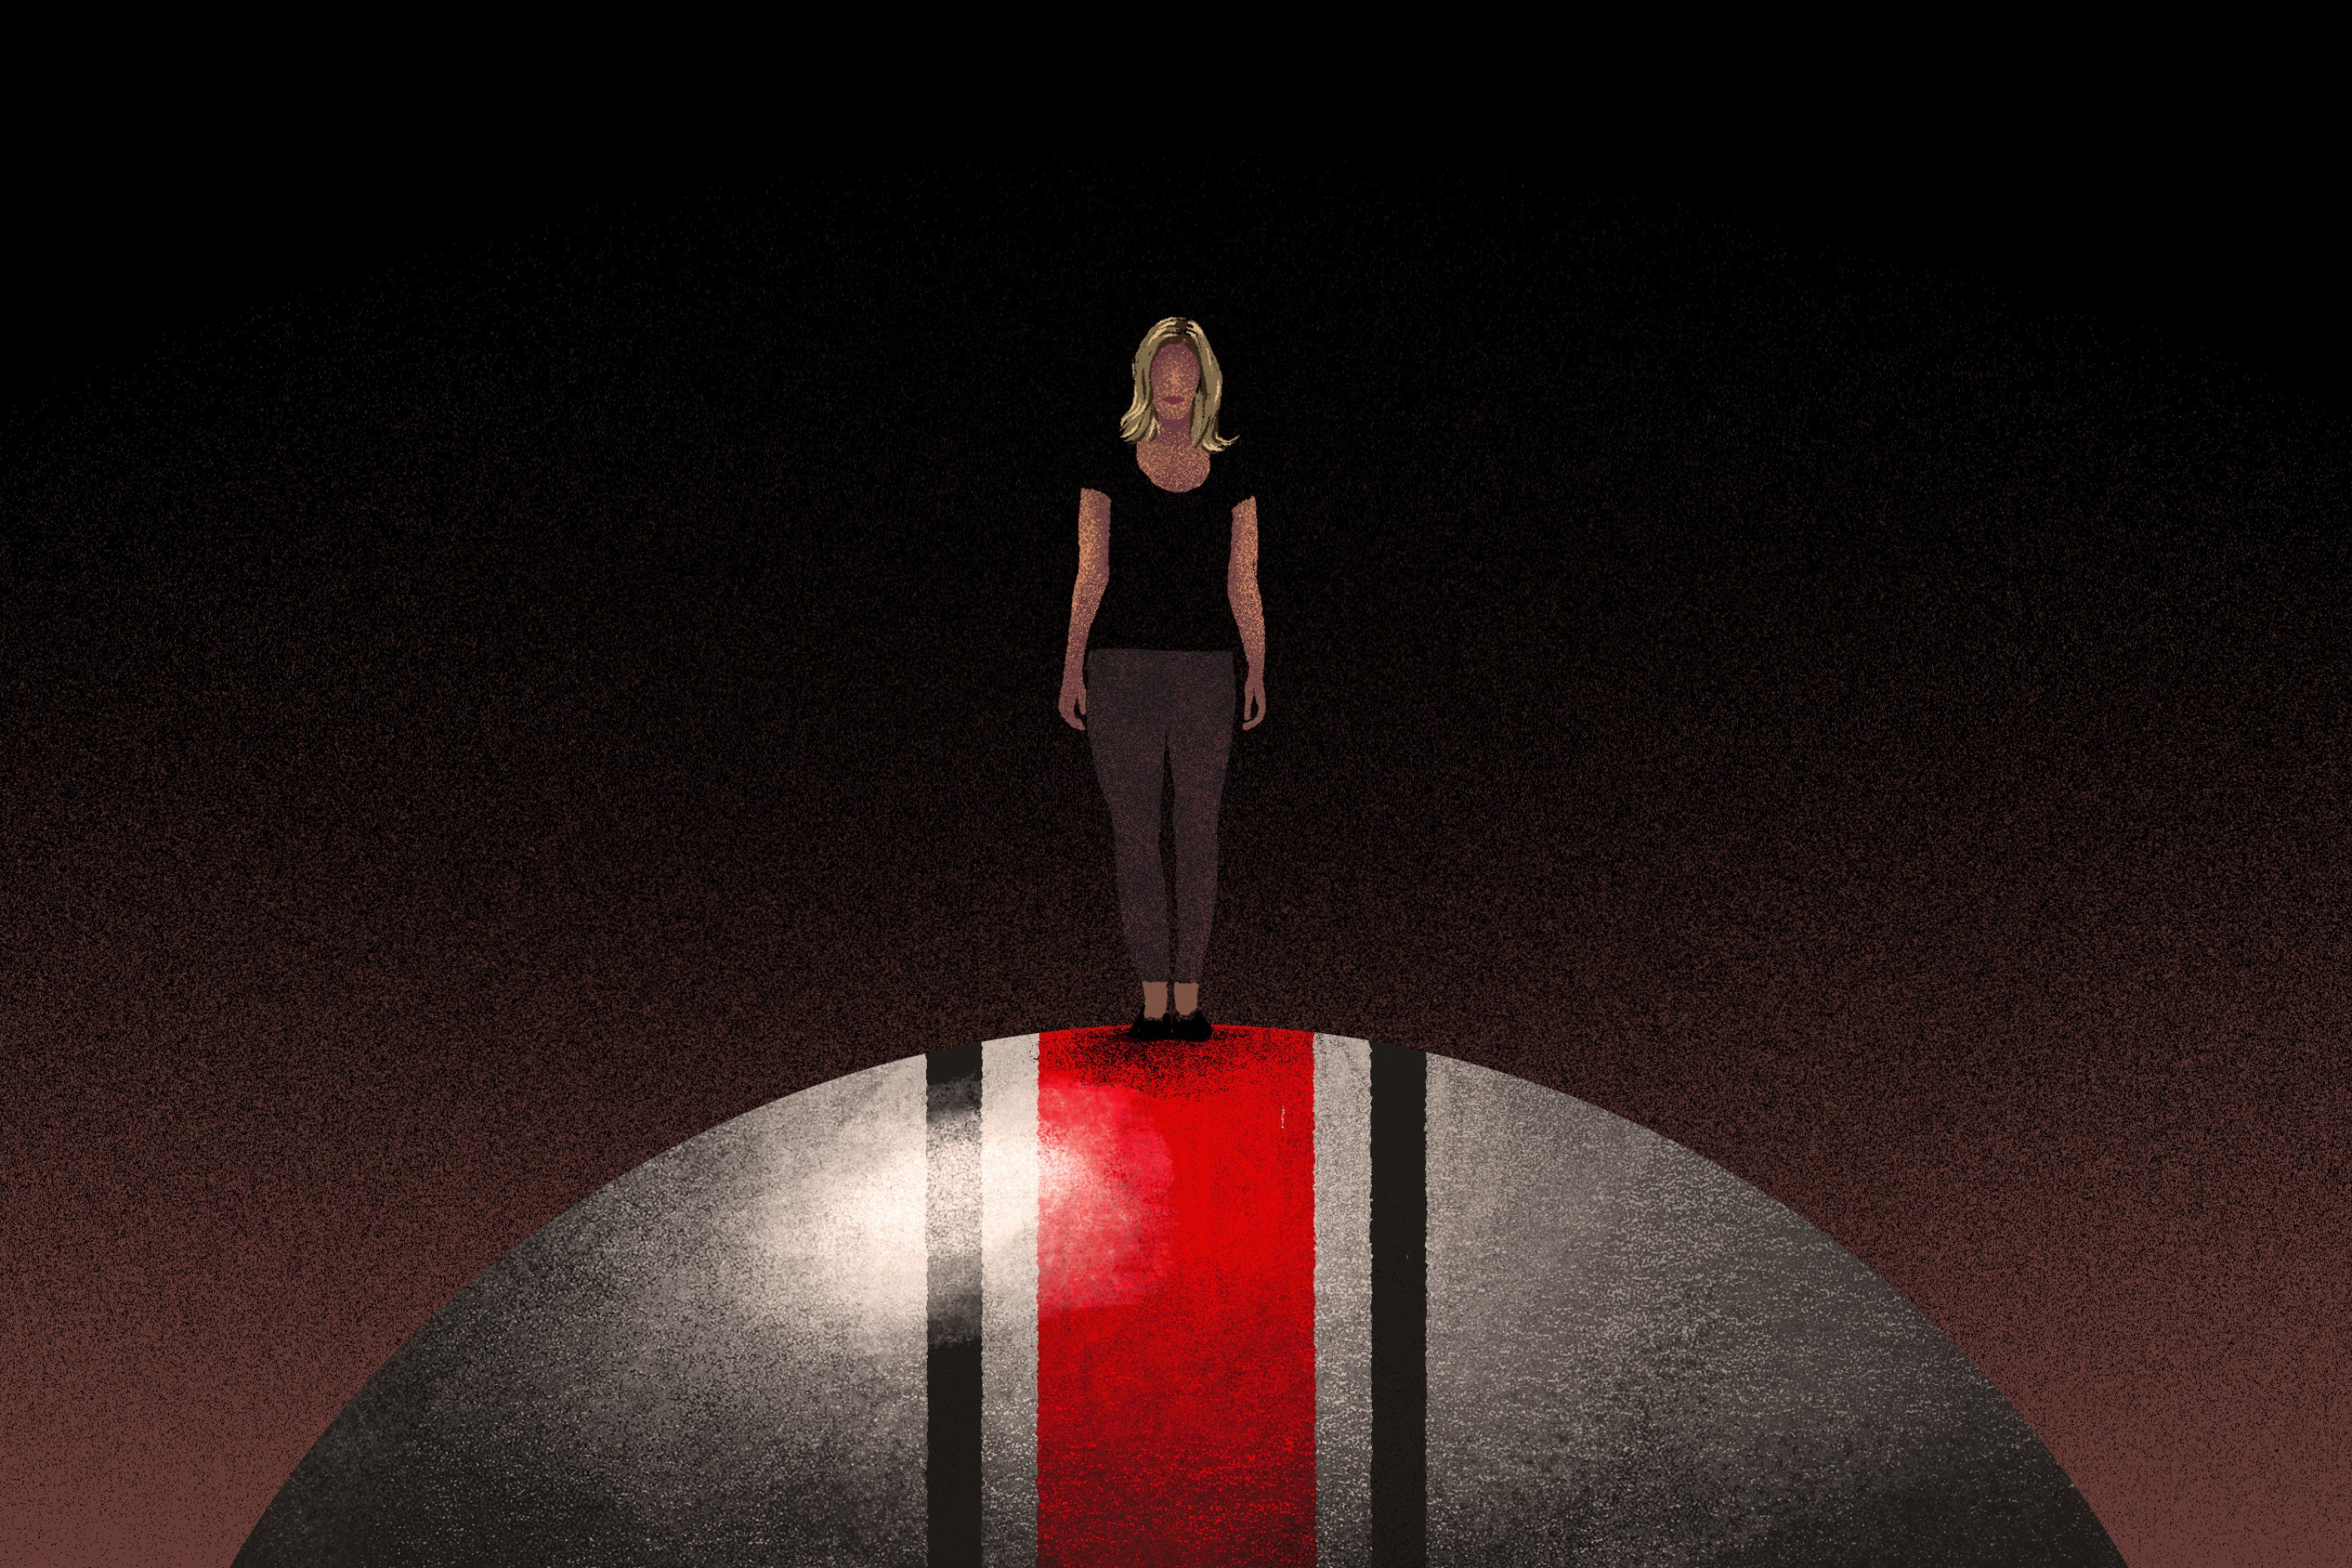 An image of a woman standing atop an Ohio State football helmet. She is very small, while the helmet fills the frame. Behind her is darkness.